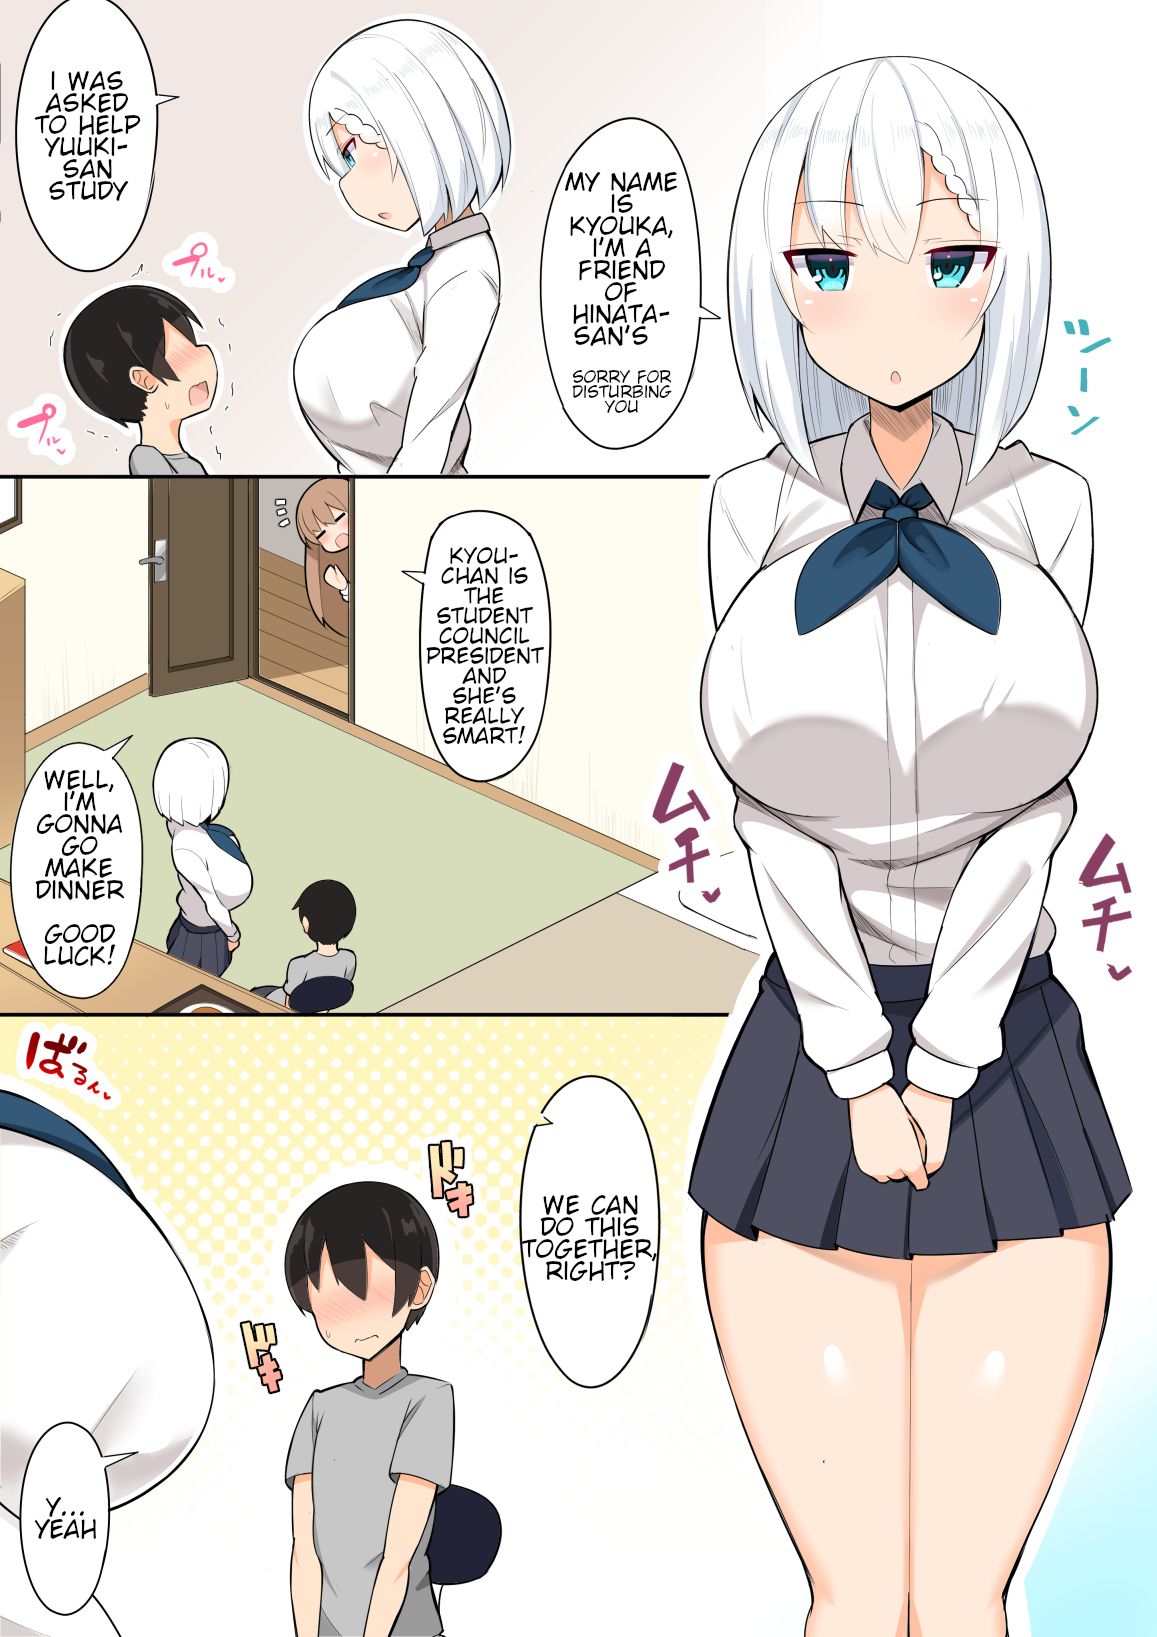 Studying For An Exam With My Older Sister [Jakko] - 1 . Studying For An  Exam With My Older Sister - Chapter 1 [Jakko] - AllPornComic